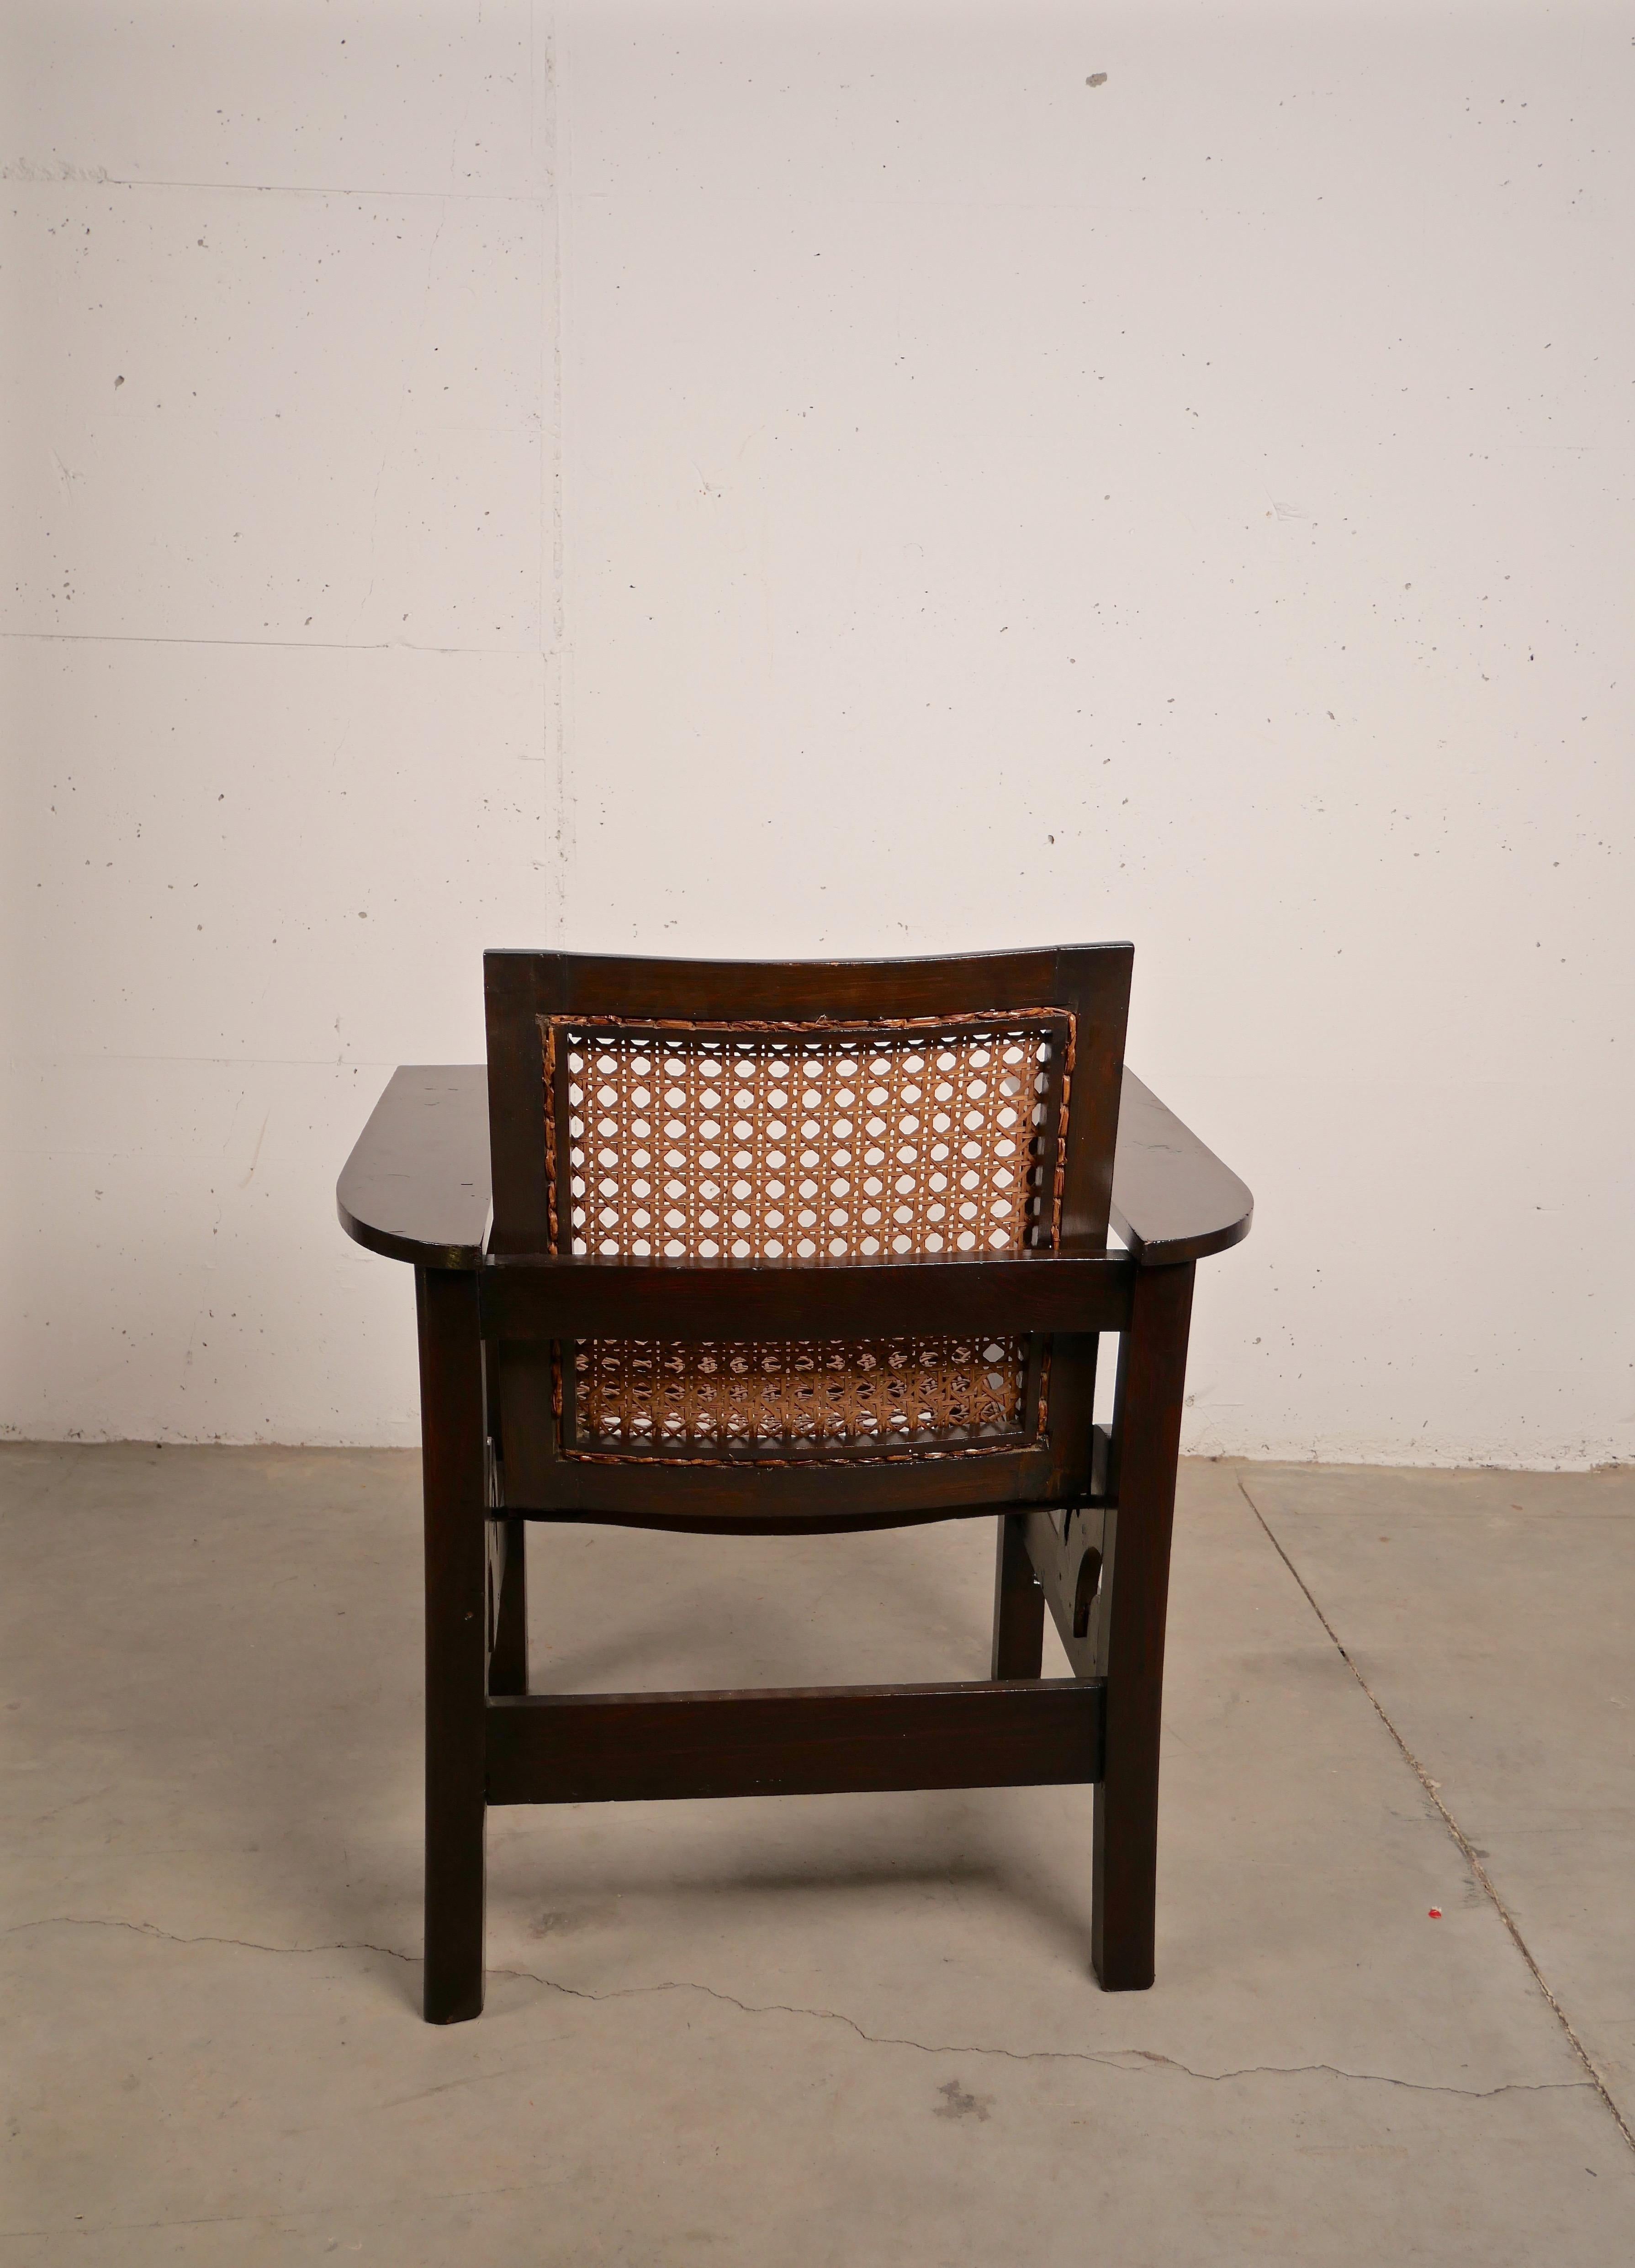 Hendaye Armchair in Walnut and Cane by Pierre Dariel, France, 1930 In Good Condition For Sale In Santa Gertrudis, Baleares